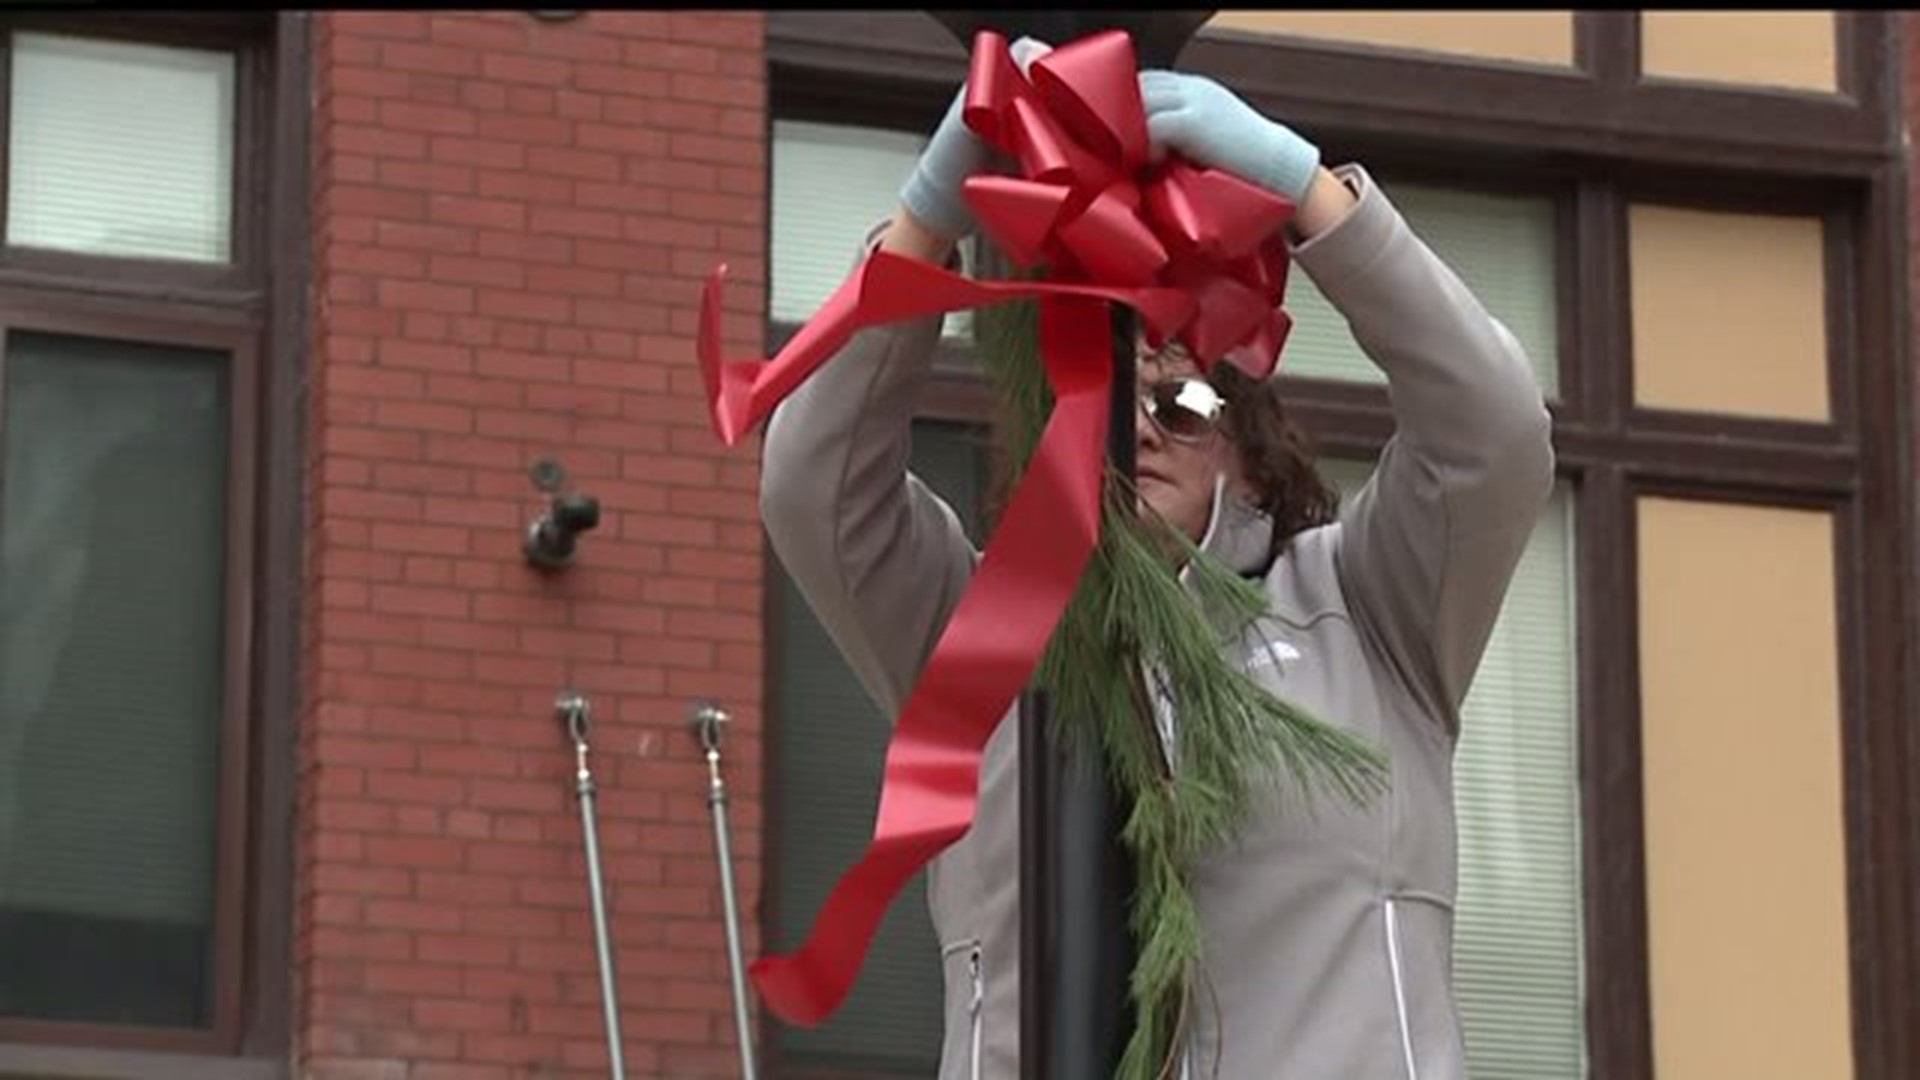 Holiday decorations go up in York